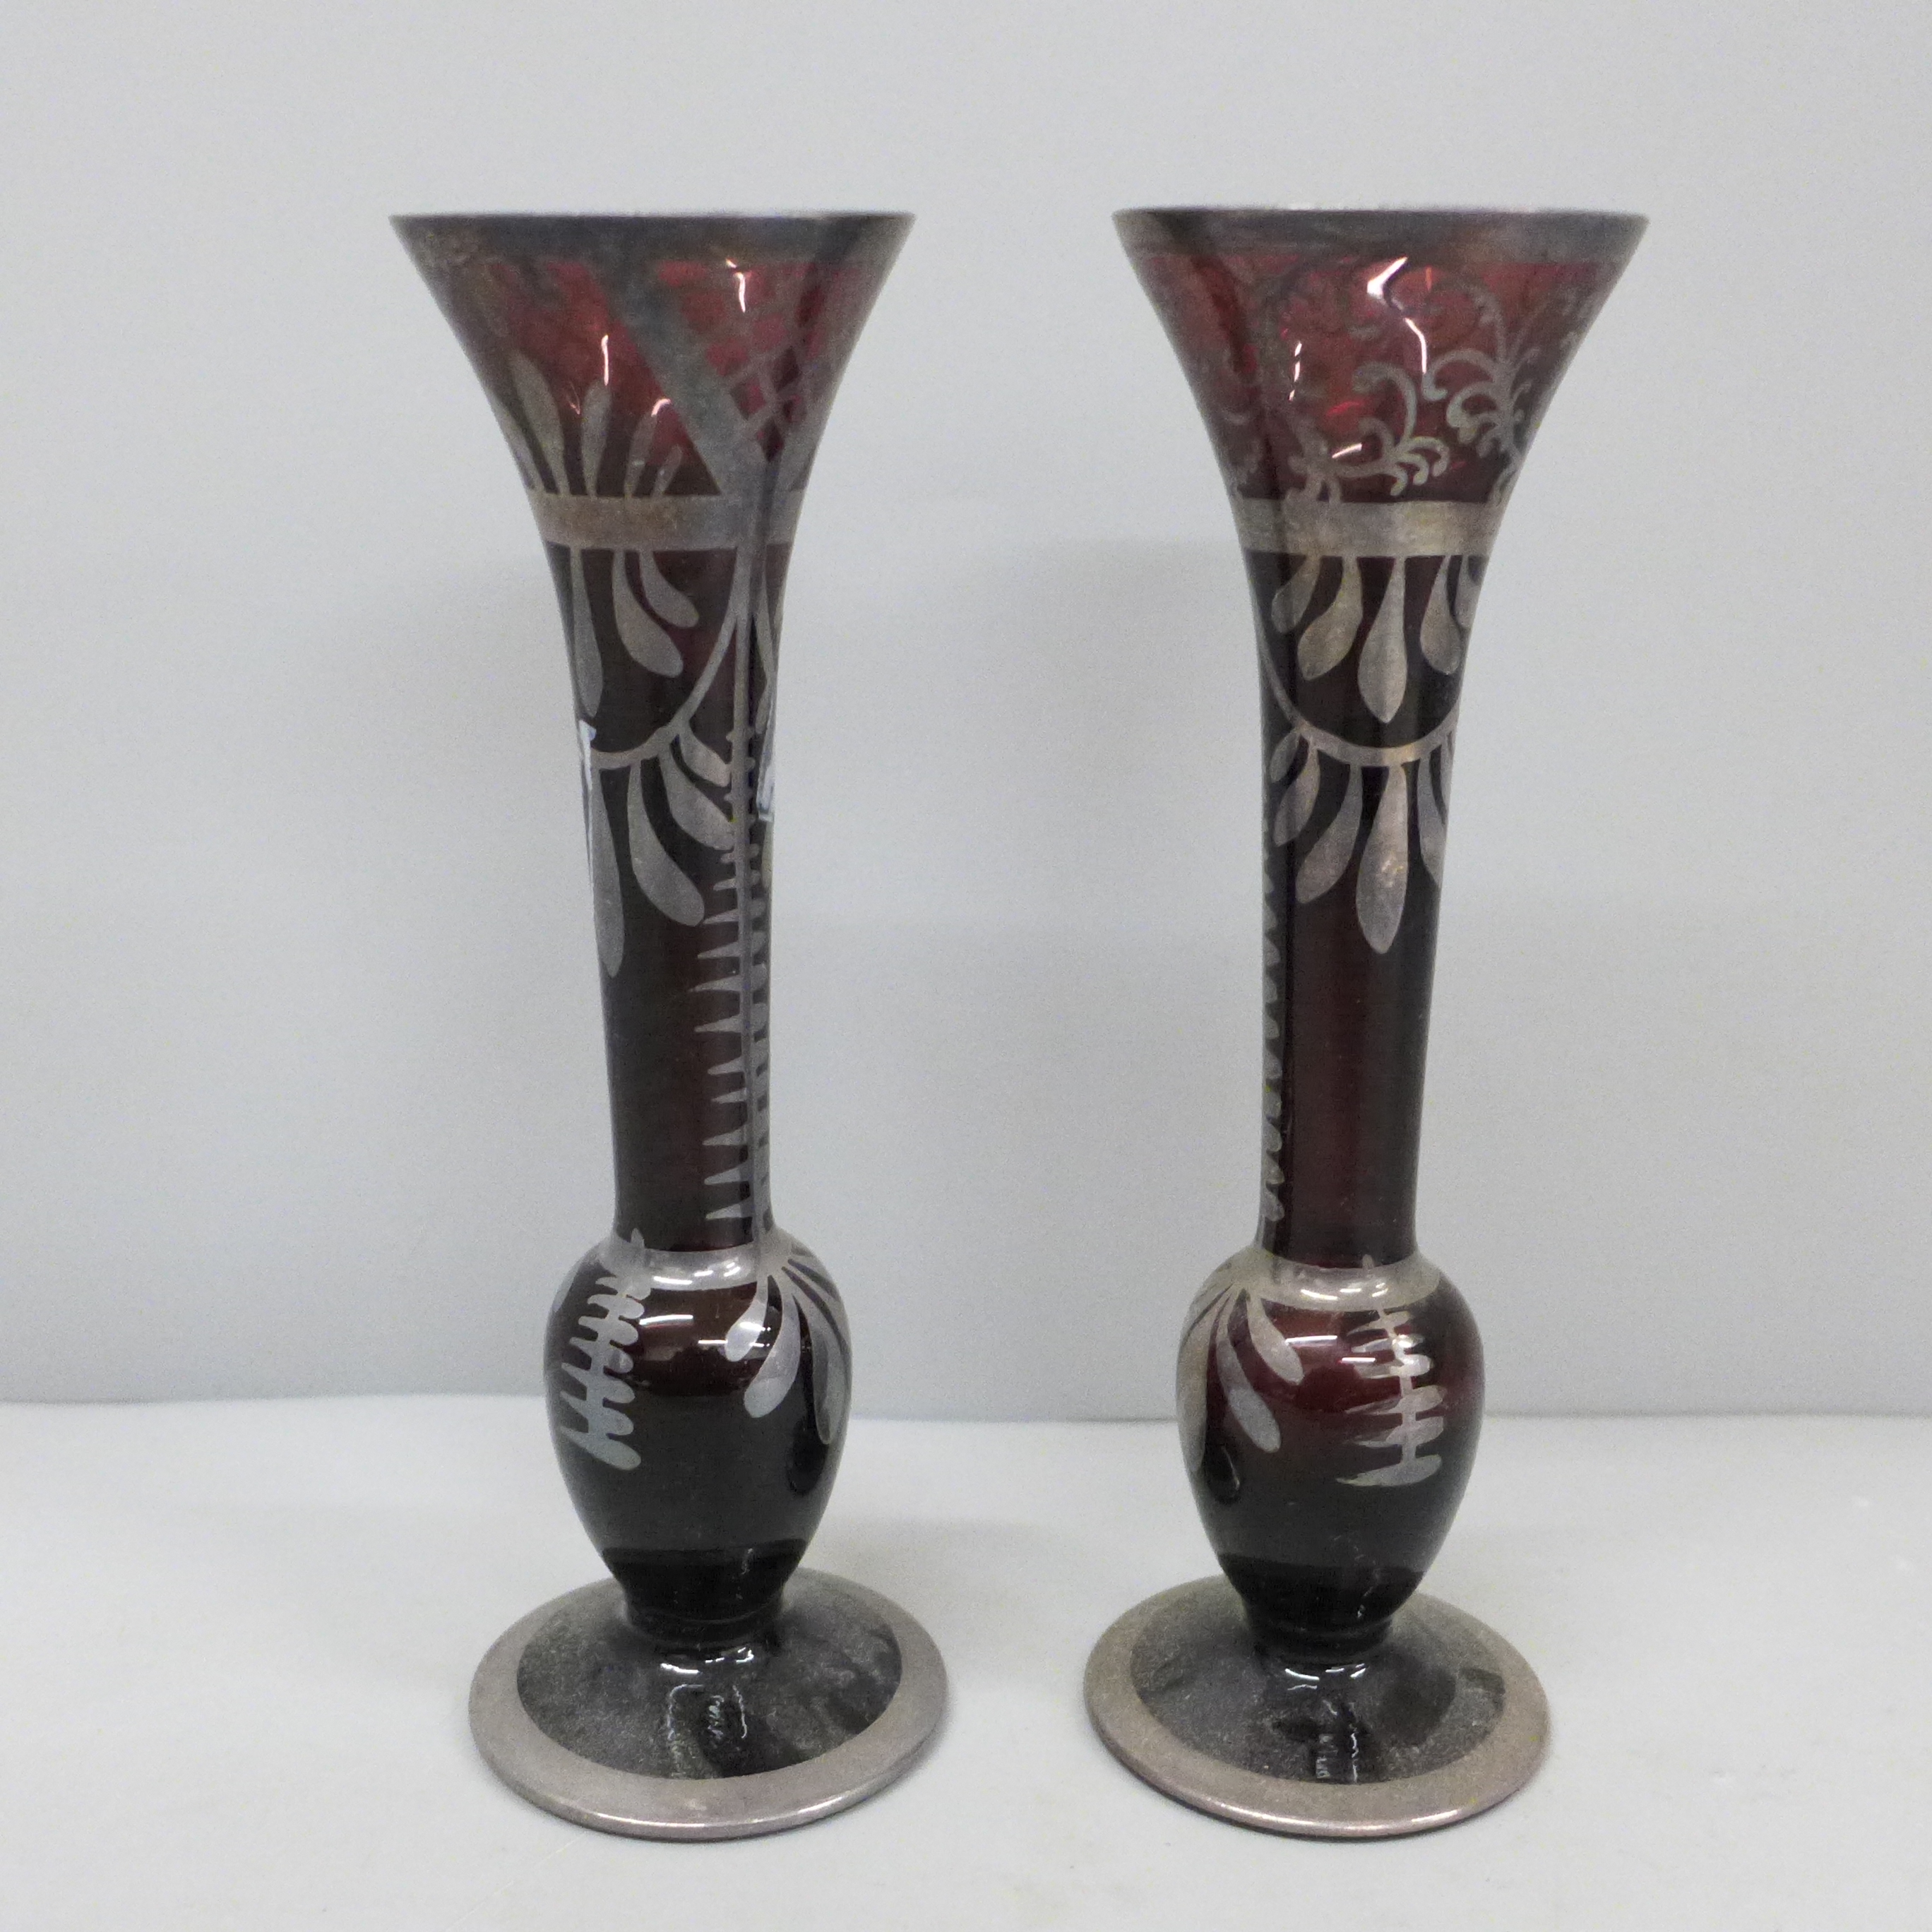 Two small Venetian glass vases with silver decoration, 15cm